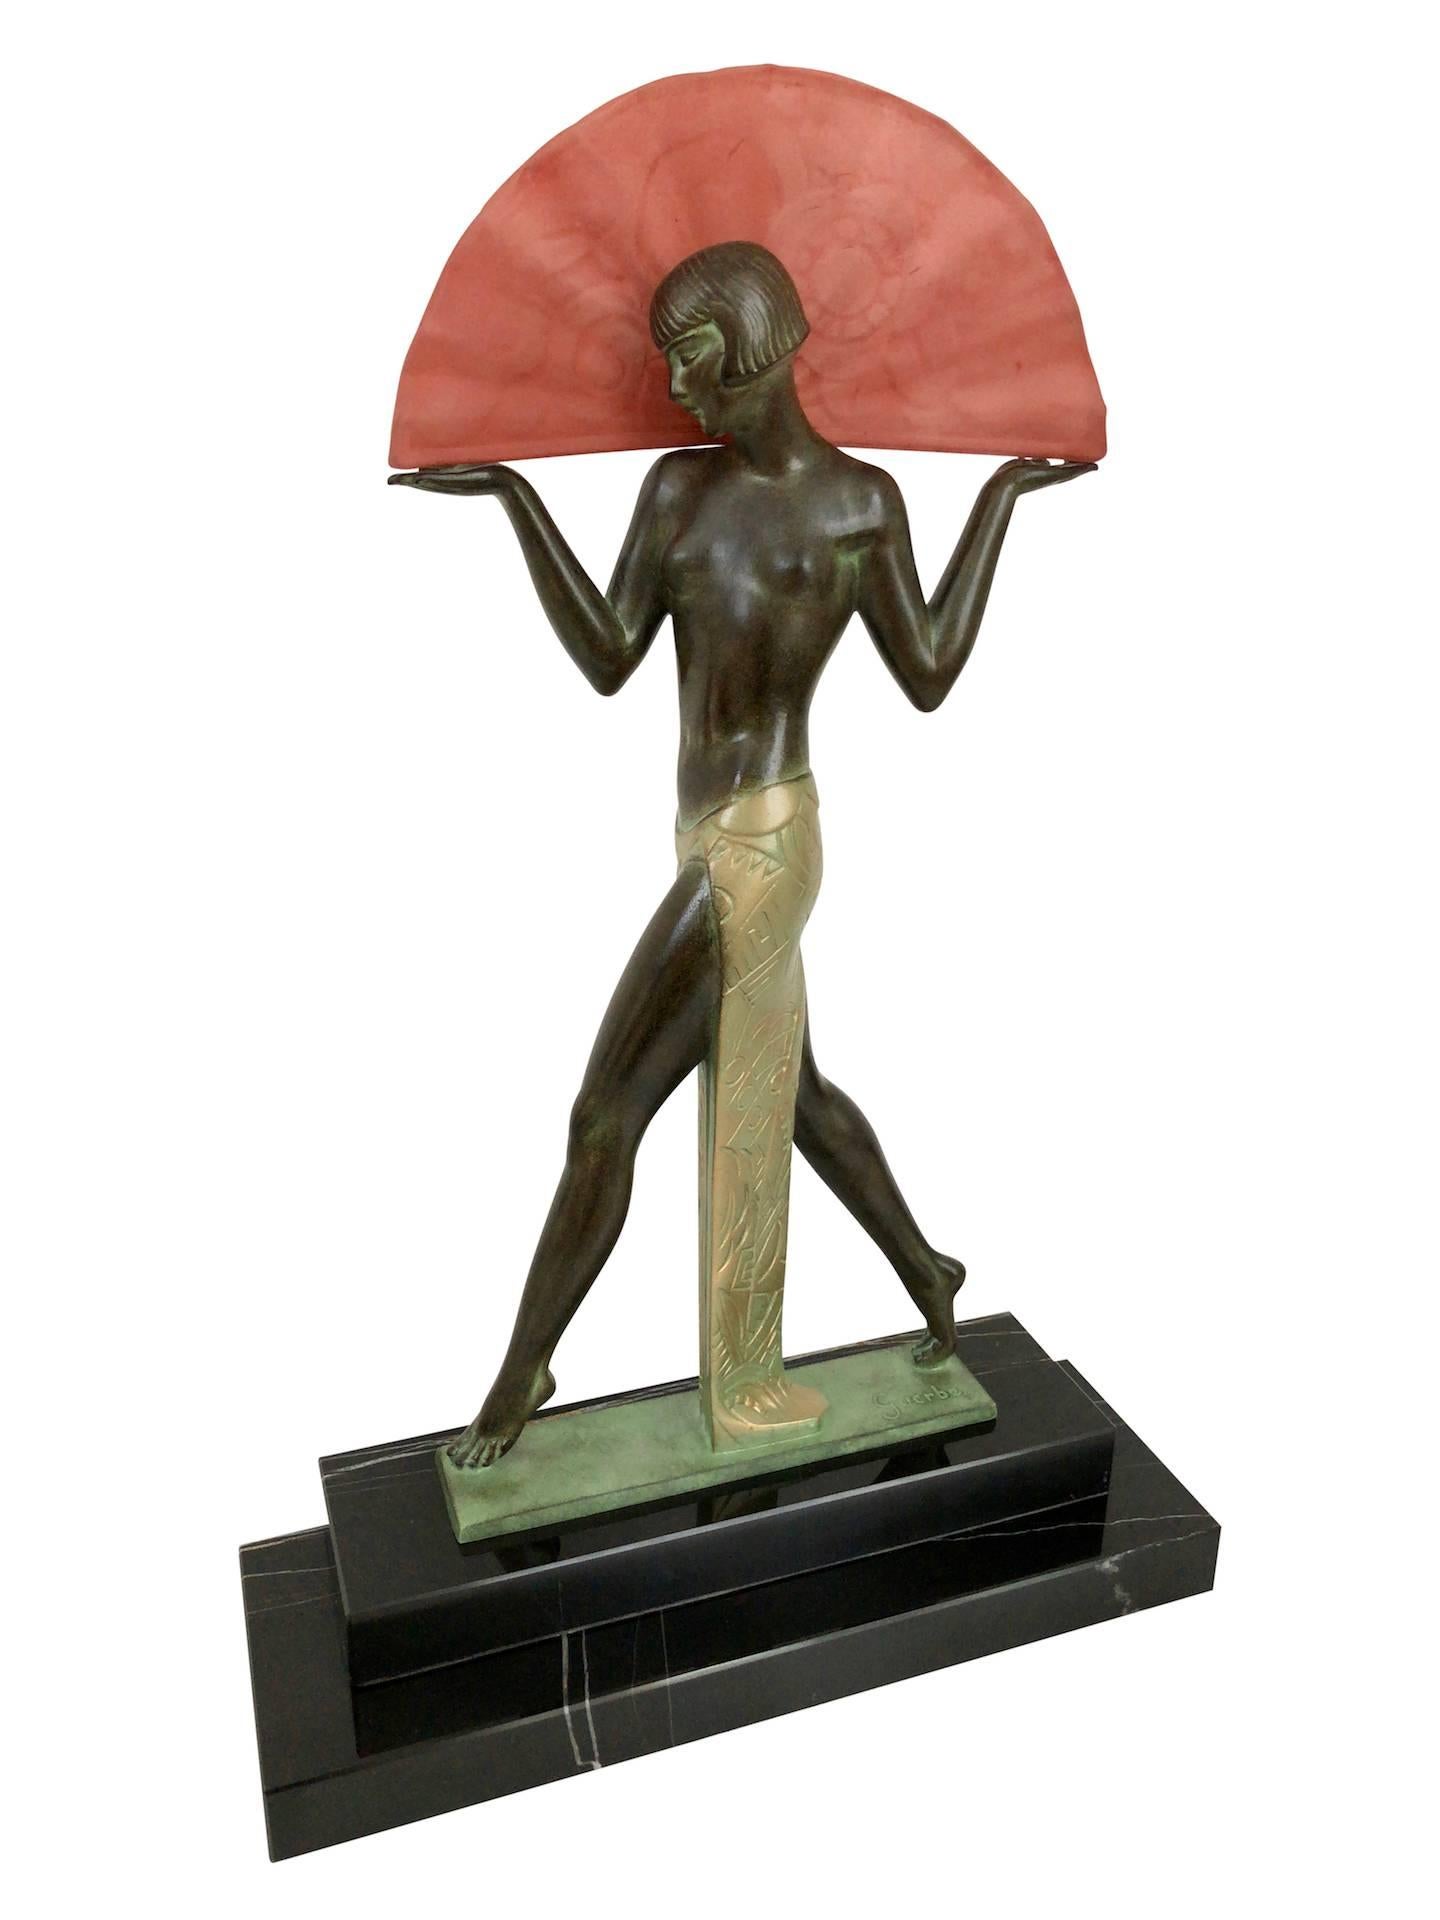 “Espana”
Designed in France during the roaring 1920s by “Raymonde Guerbe” (1894-1995) 
She was married with the famous sculptor 